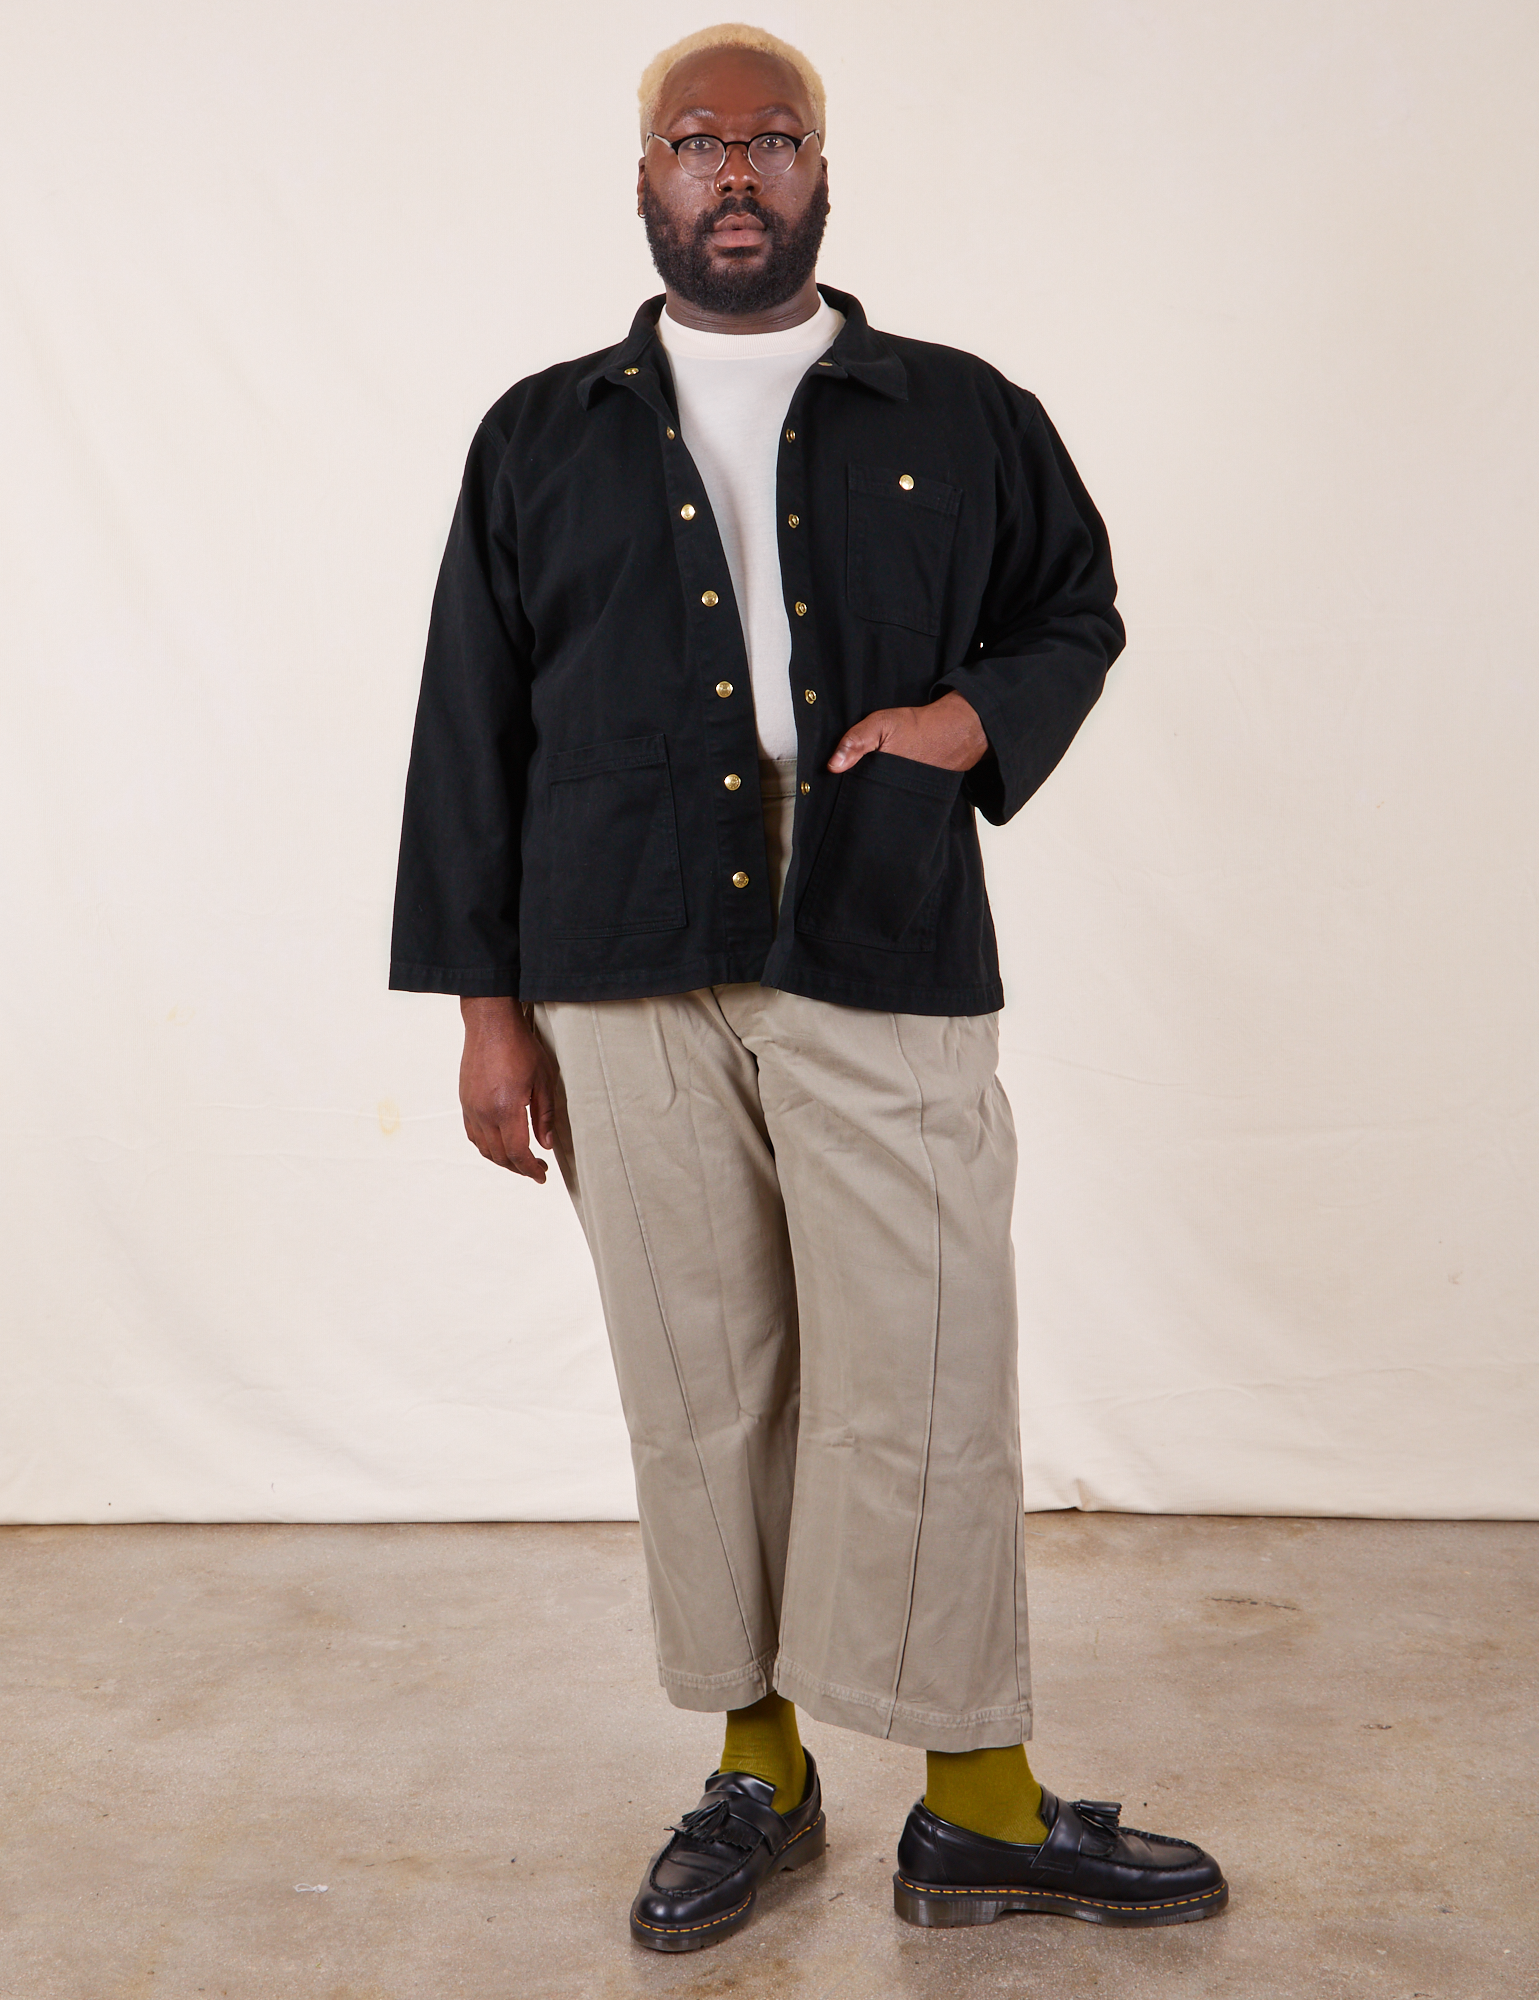 Elijah is 6&#39;4&quot; and wearing 3XL Denim Work Jacket in Basic Black paired with khaki gray Western Pants. He has his right hand in the jacket pocket.